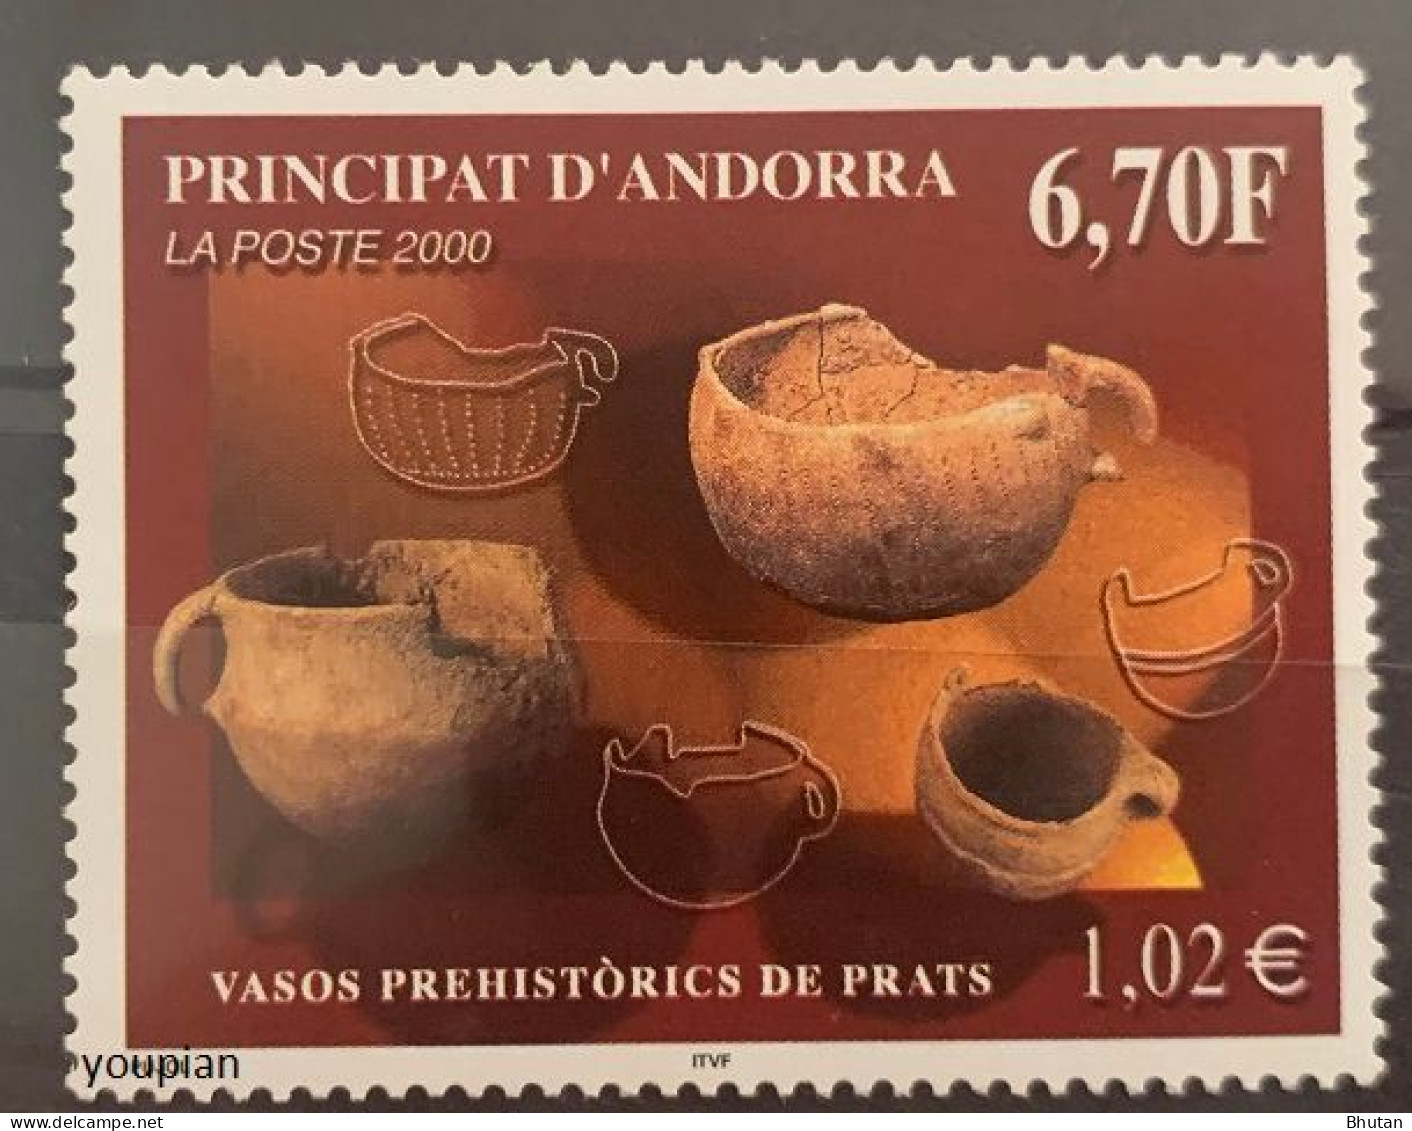 Andorra (French Post) 2000, Pottery, MNH Single Stamp - Ungebraucht